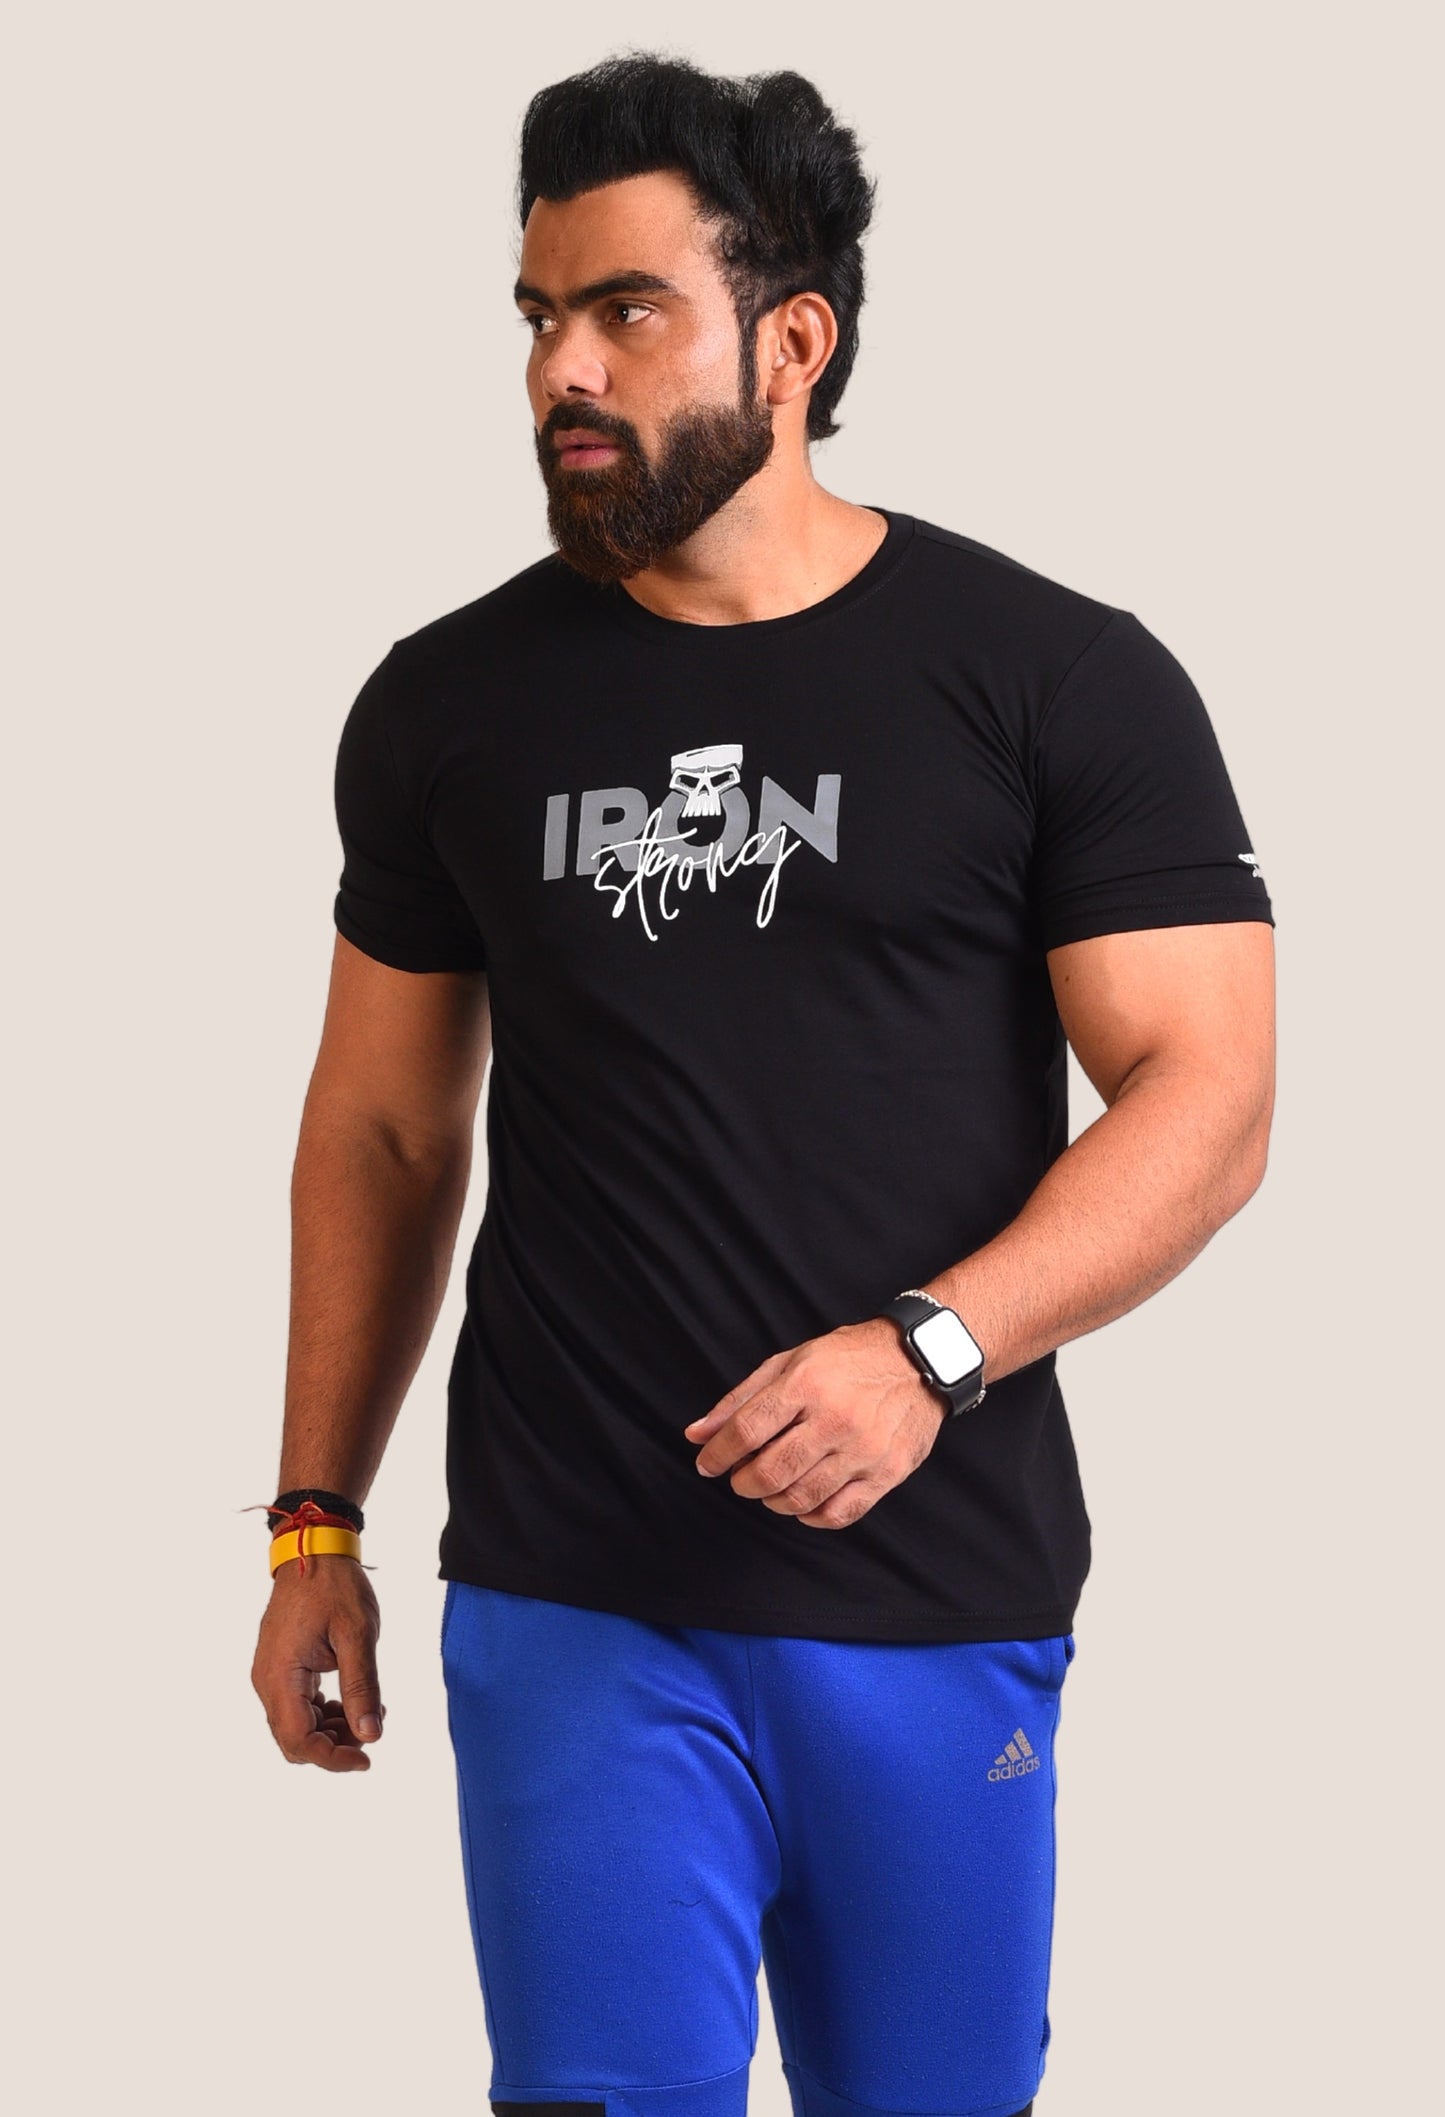 Gym T Shirt - Iron Strong - Men T-Shirt with premium cotton Lycra. The Sports T Shirt by Strong Soul